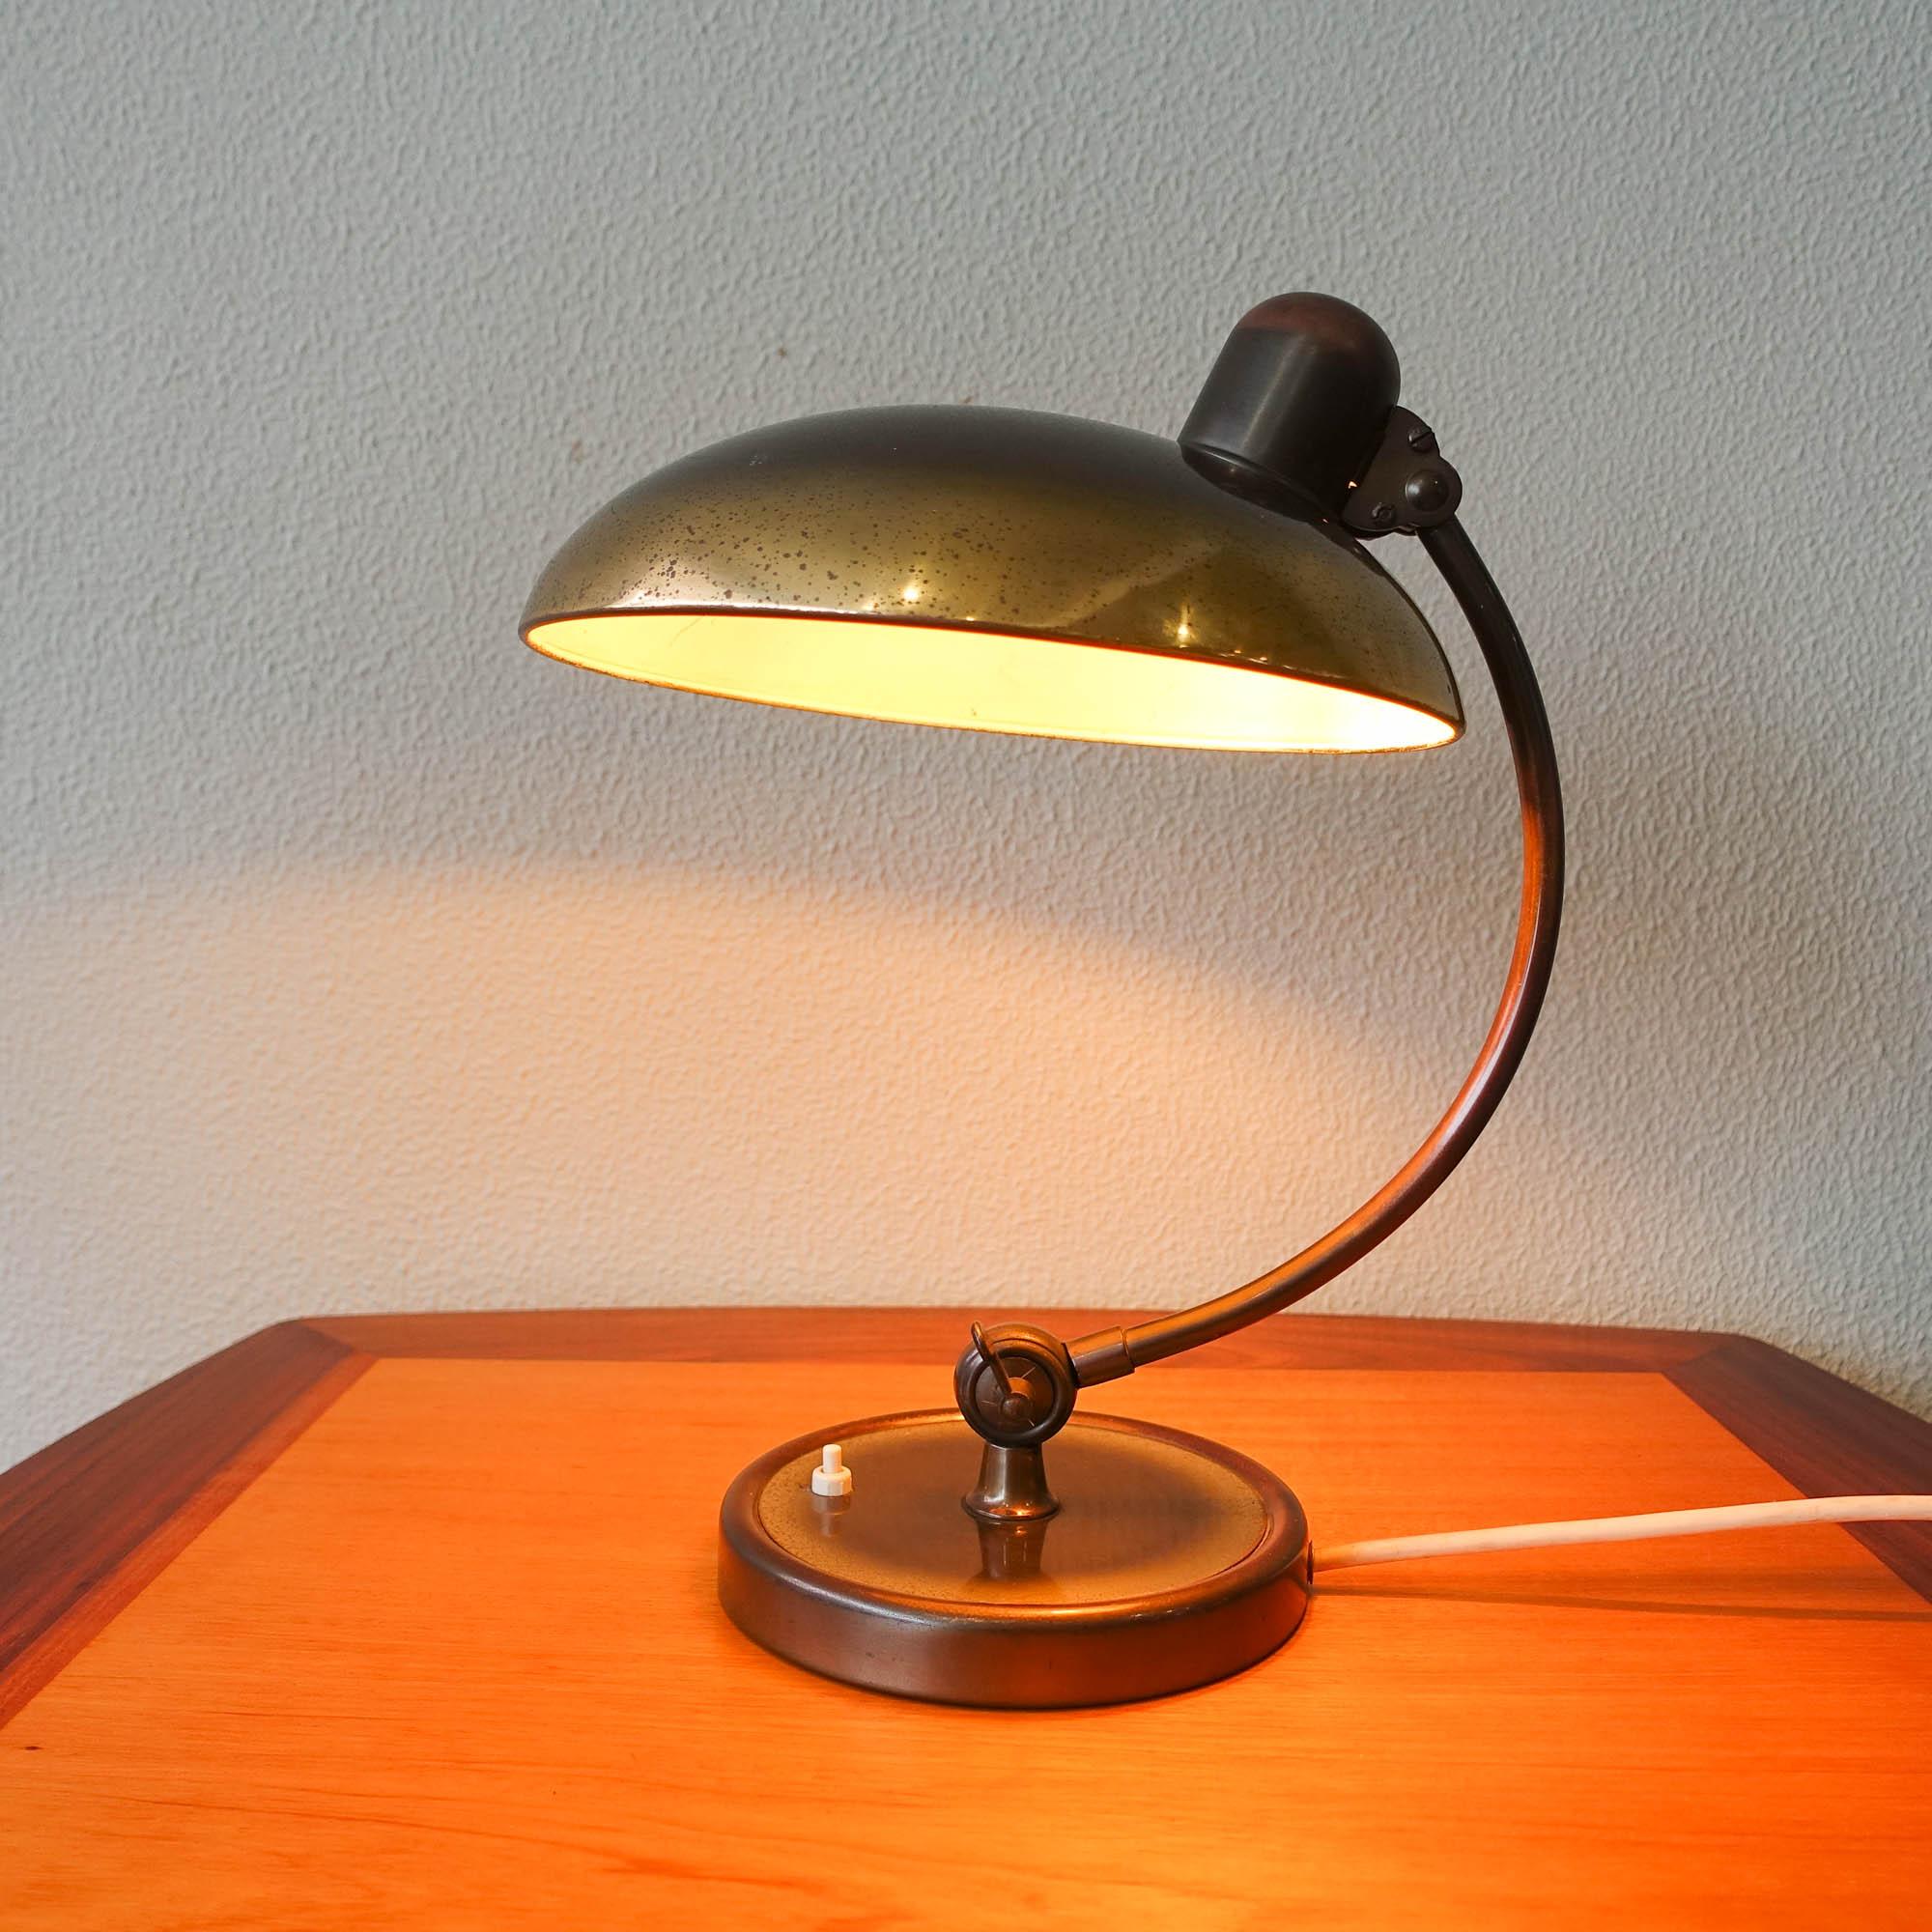 This table lamp, model 6631-T Luxus, was designed by Christian Dell for Kaiser Idell, in Germany, during the 1950's. It is with original old brass polished finishing. In very good vintage condition.